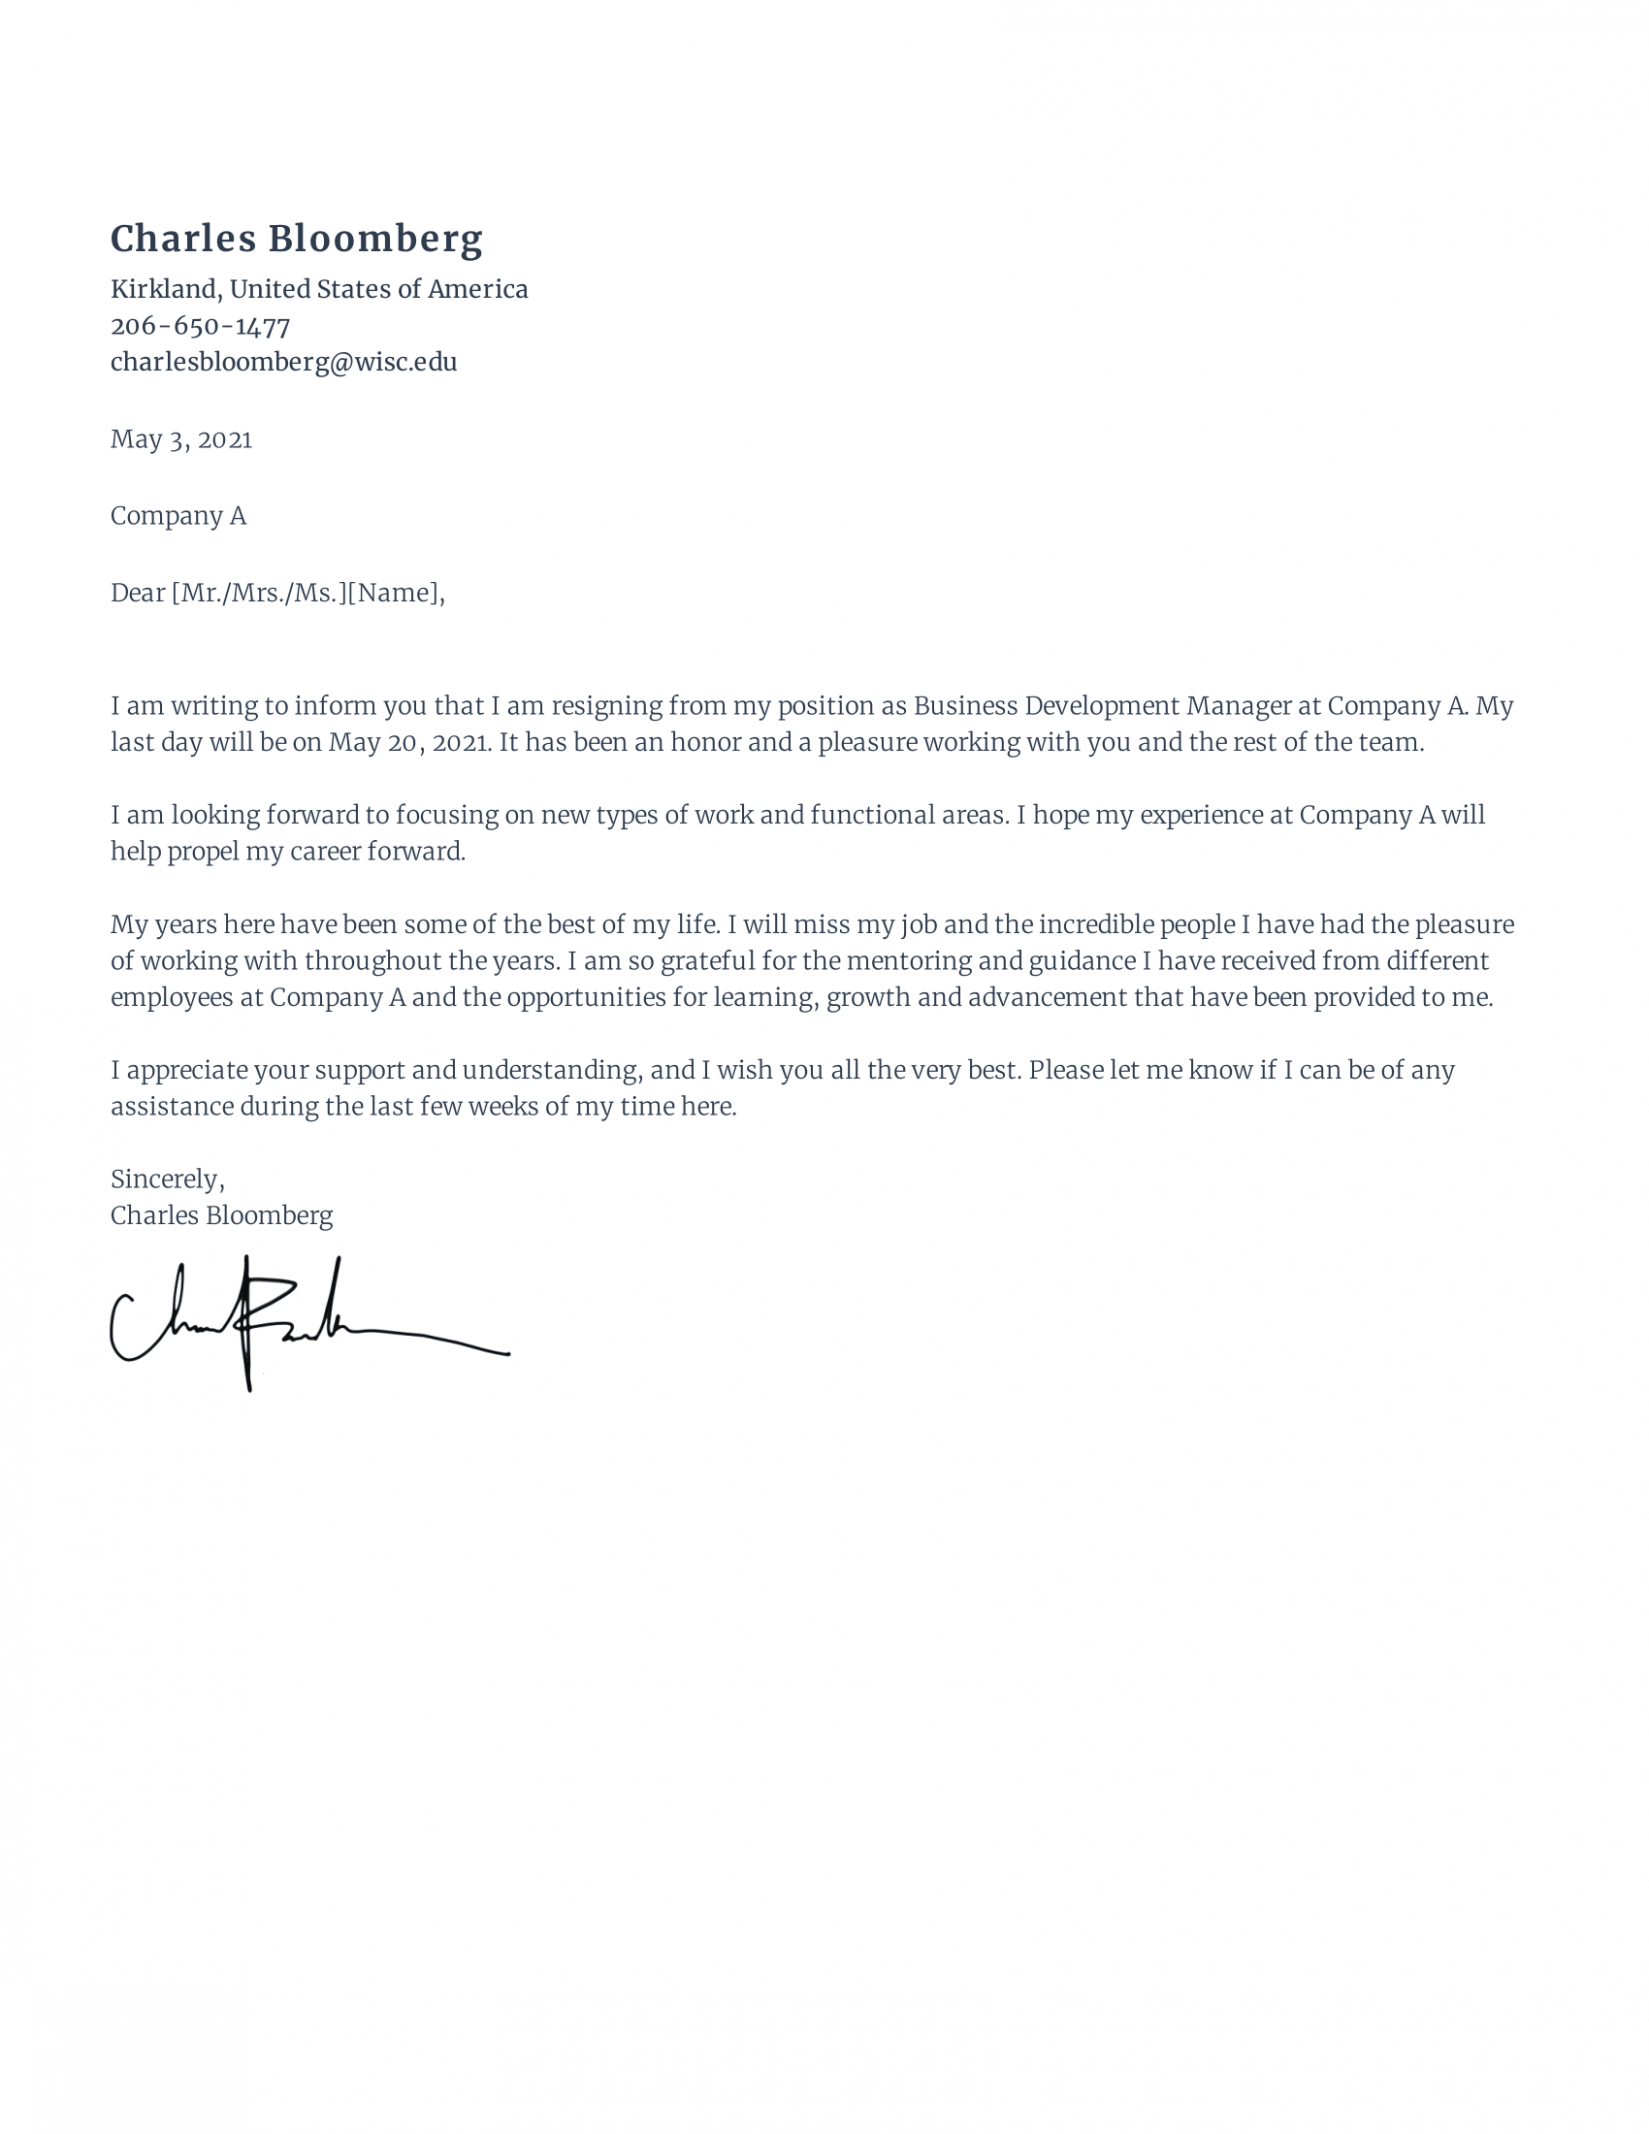 Editable Resignation Letter Due To New Job Opportunity Docs